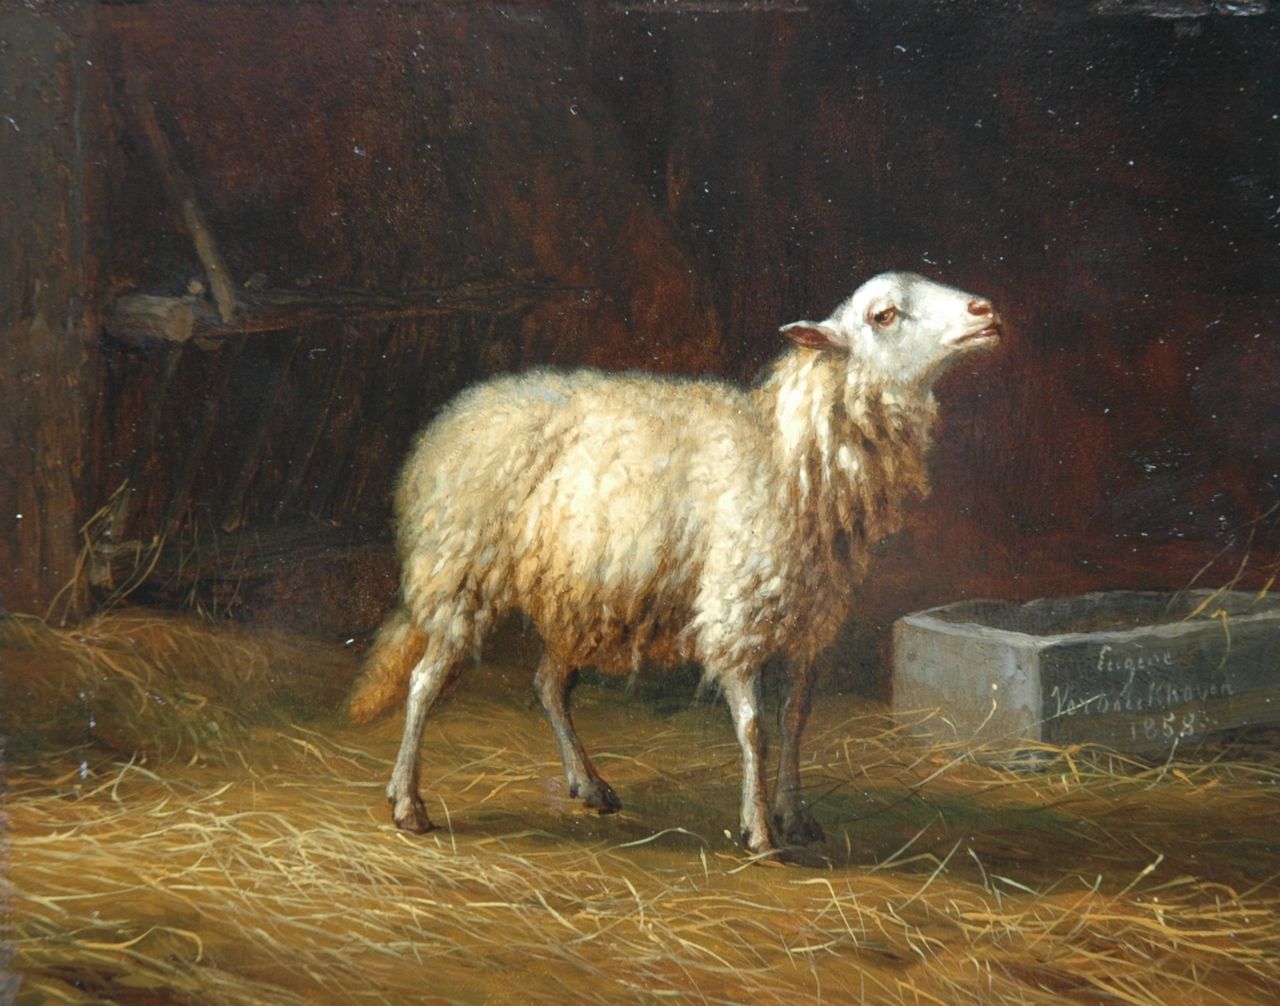 Verboeckhoven E.J.  | Eugène Joseph Verboeckhoven, A sheep, oil on panel 11.9 x 15.2 cm, signed l.r. on the mess-kit and dated 1858